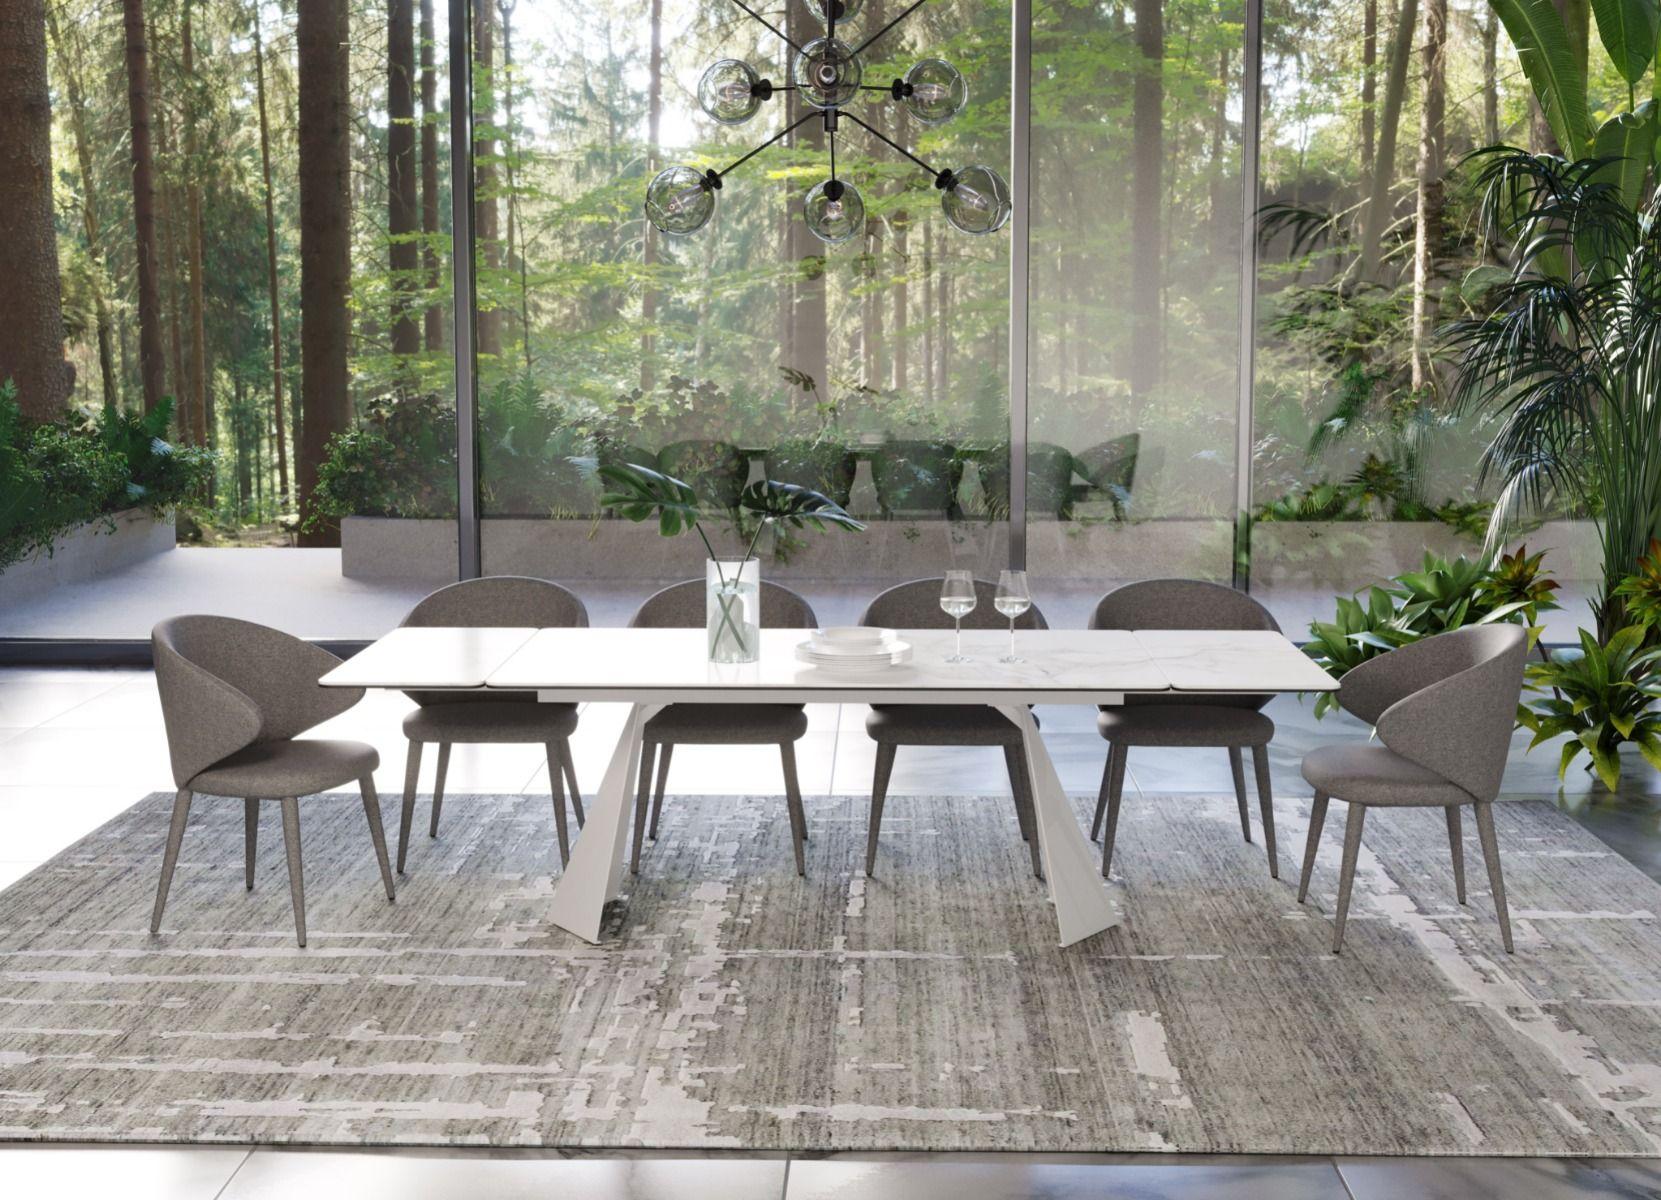 Contemporary, Modern Dining Room Set Encanto Keller VGNS8762-DT-9pcs in White, Gray Fabric